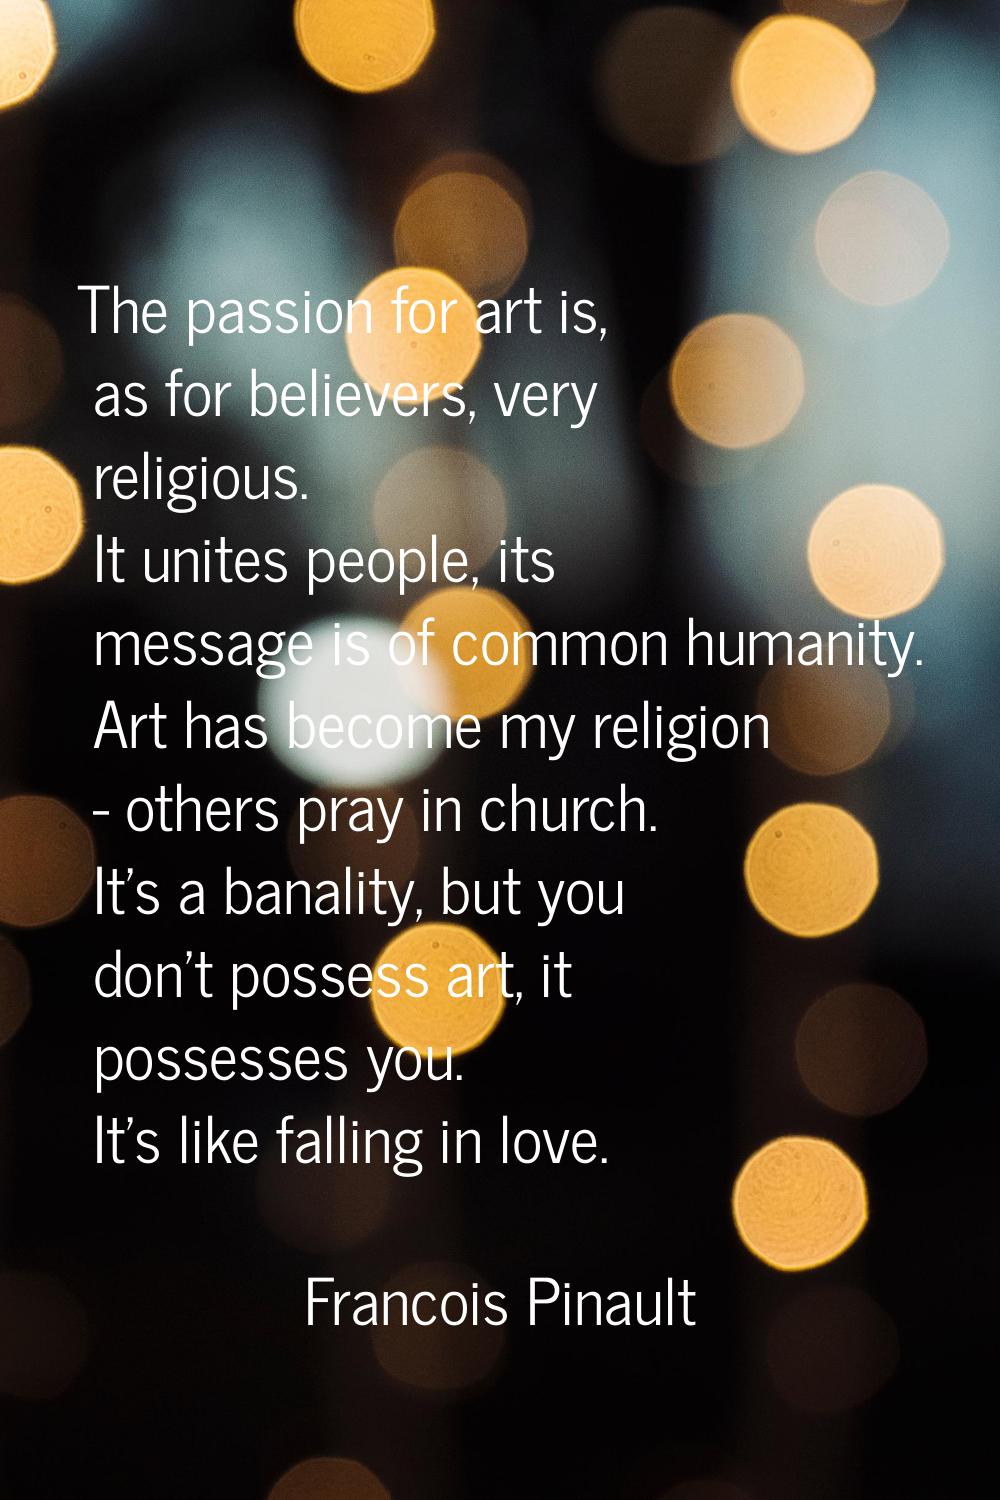 The passion for art is, as for believers, very religious. It unites people, its message is of commo